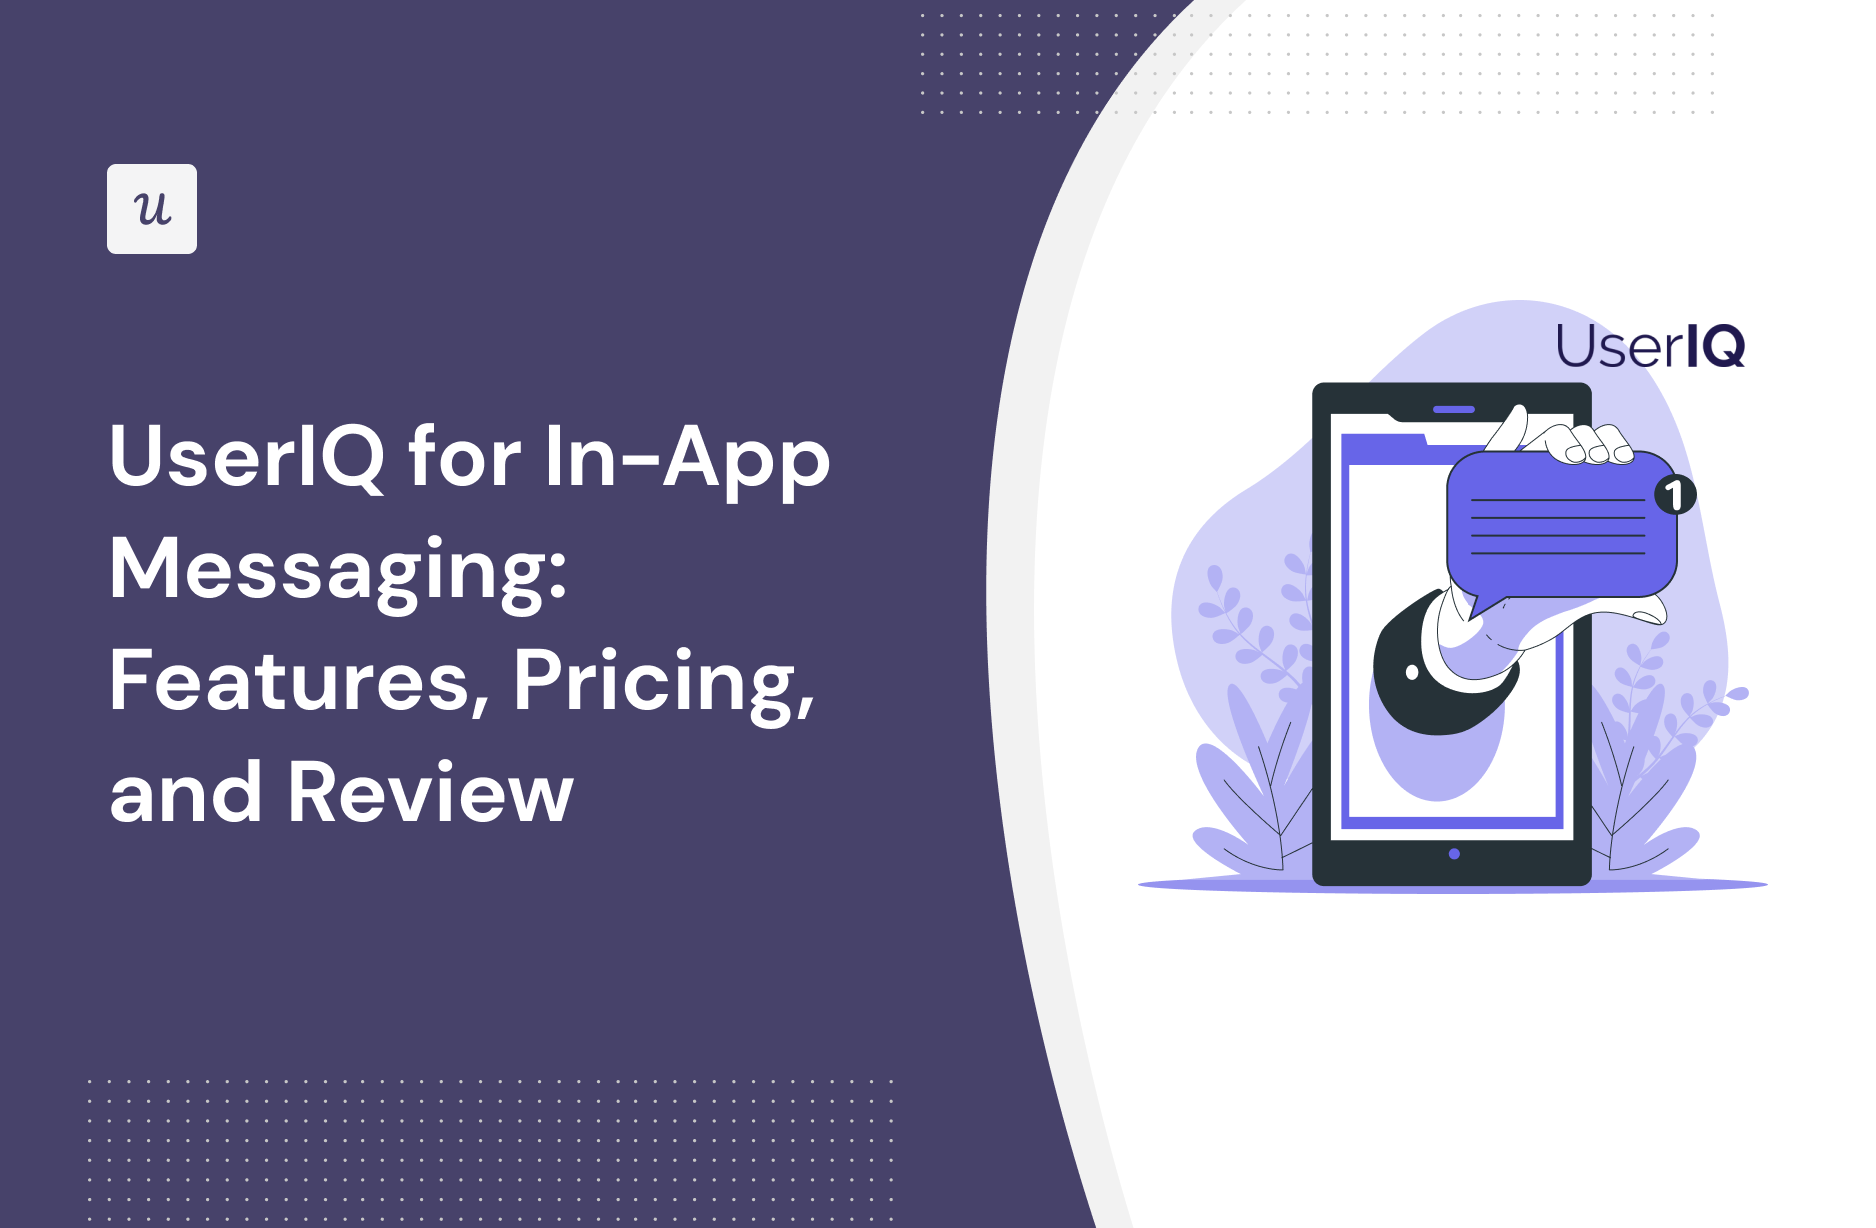 UserIQ for In-App messaging: Features, Pricing, and Review